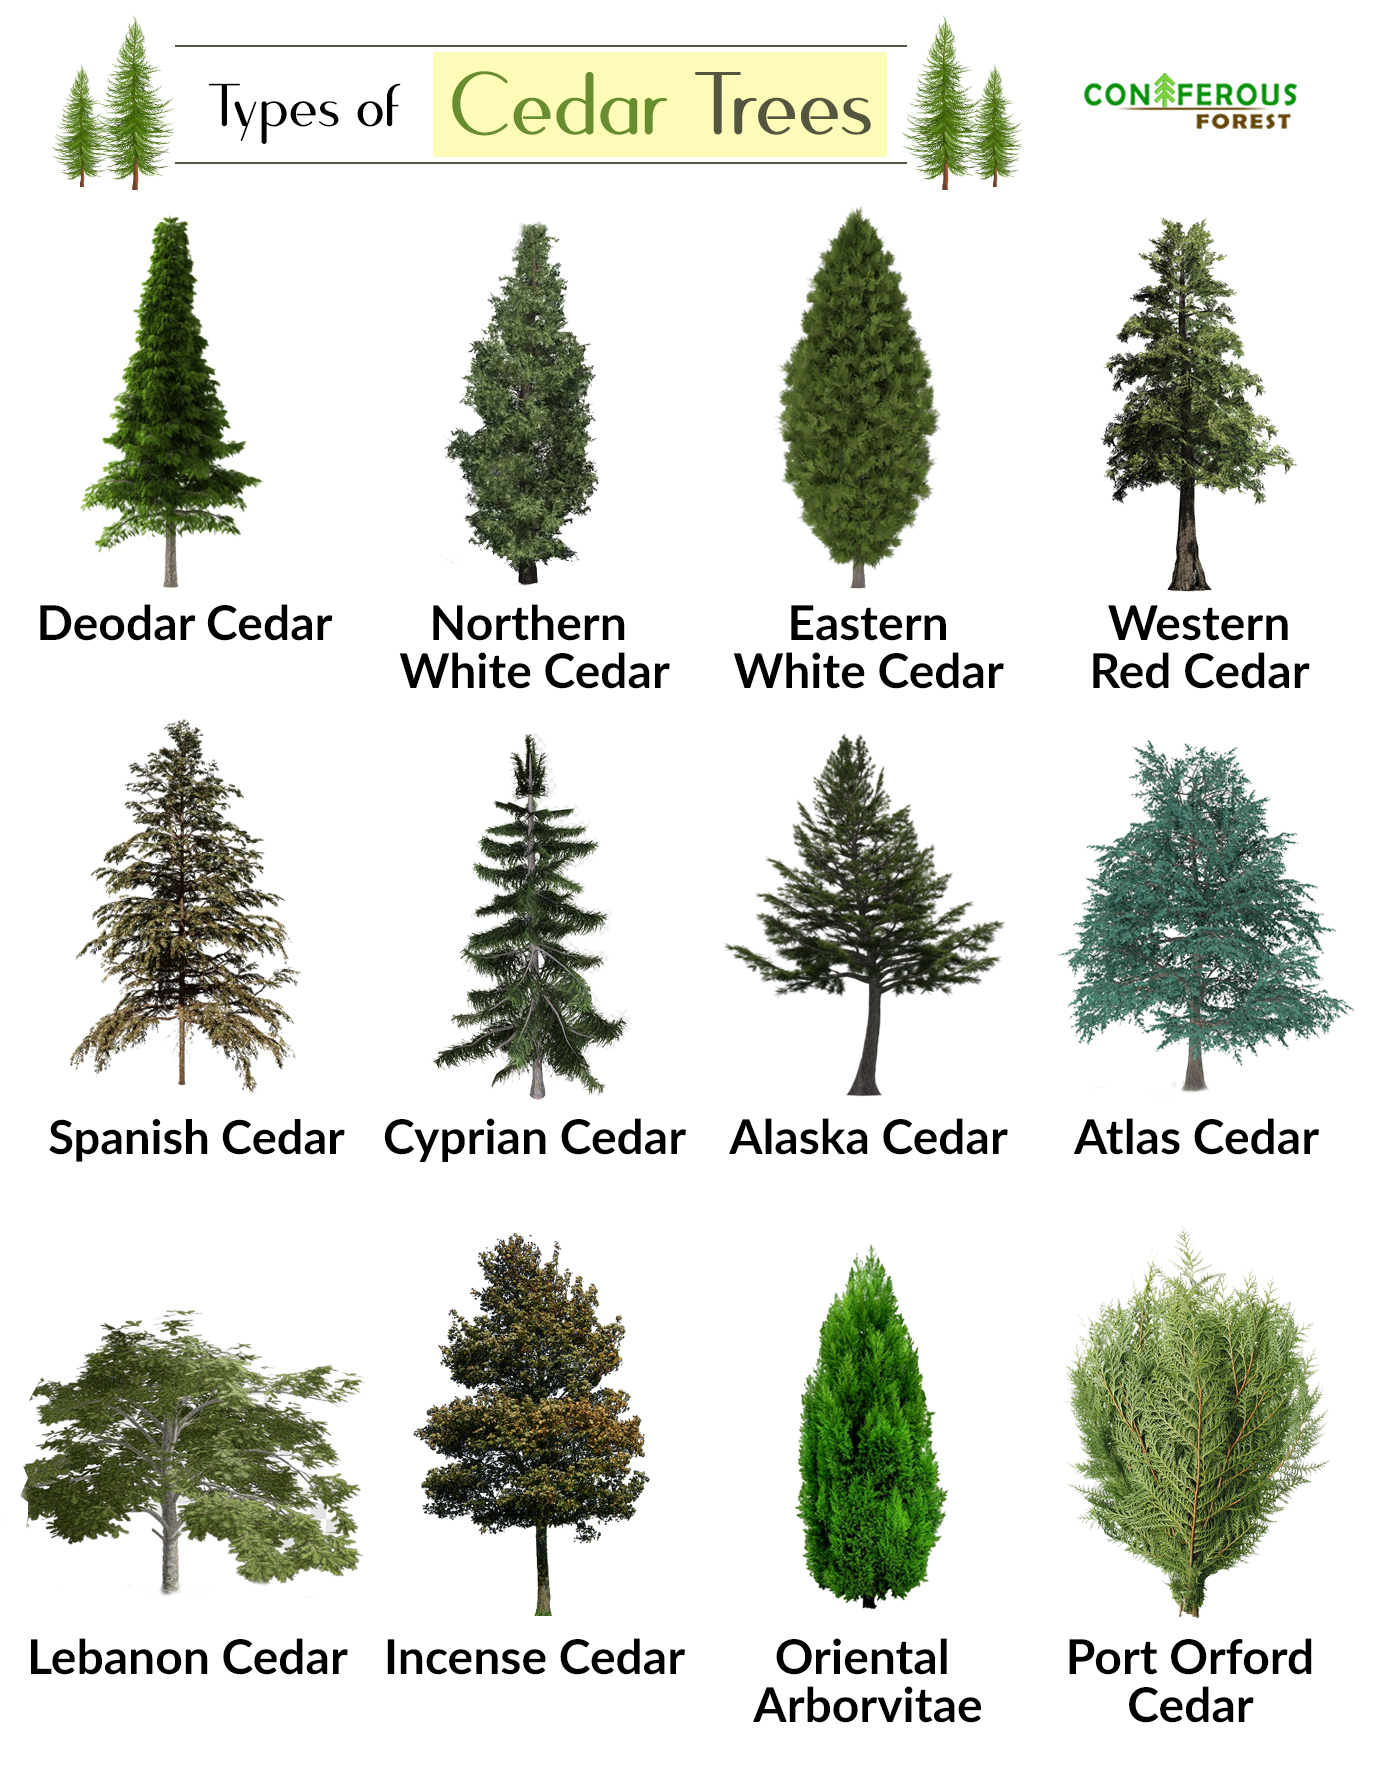 Cedar Tree Facts, Types, Identification, Diseases, Pictures